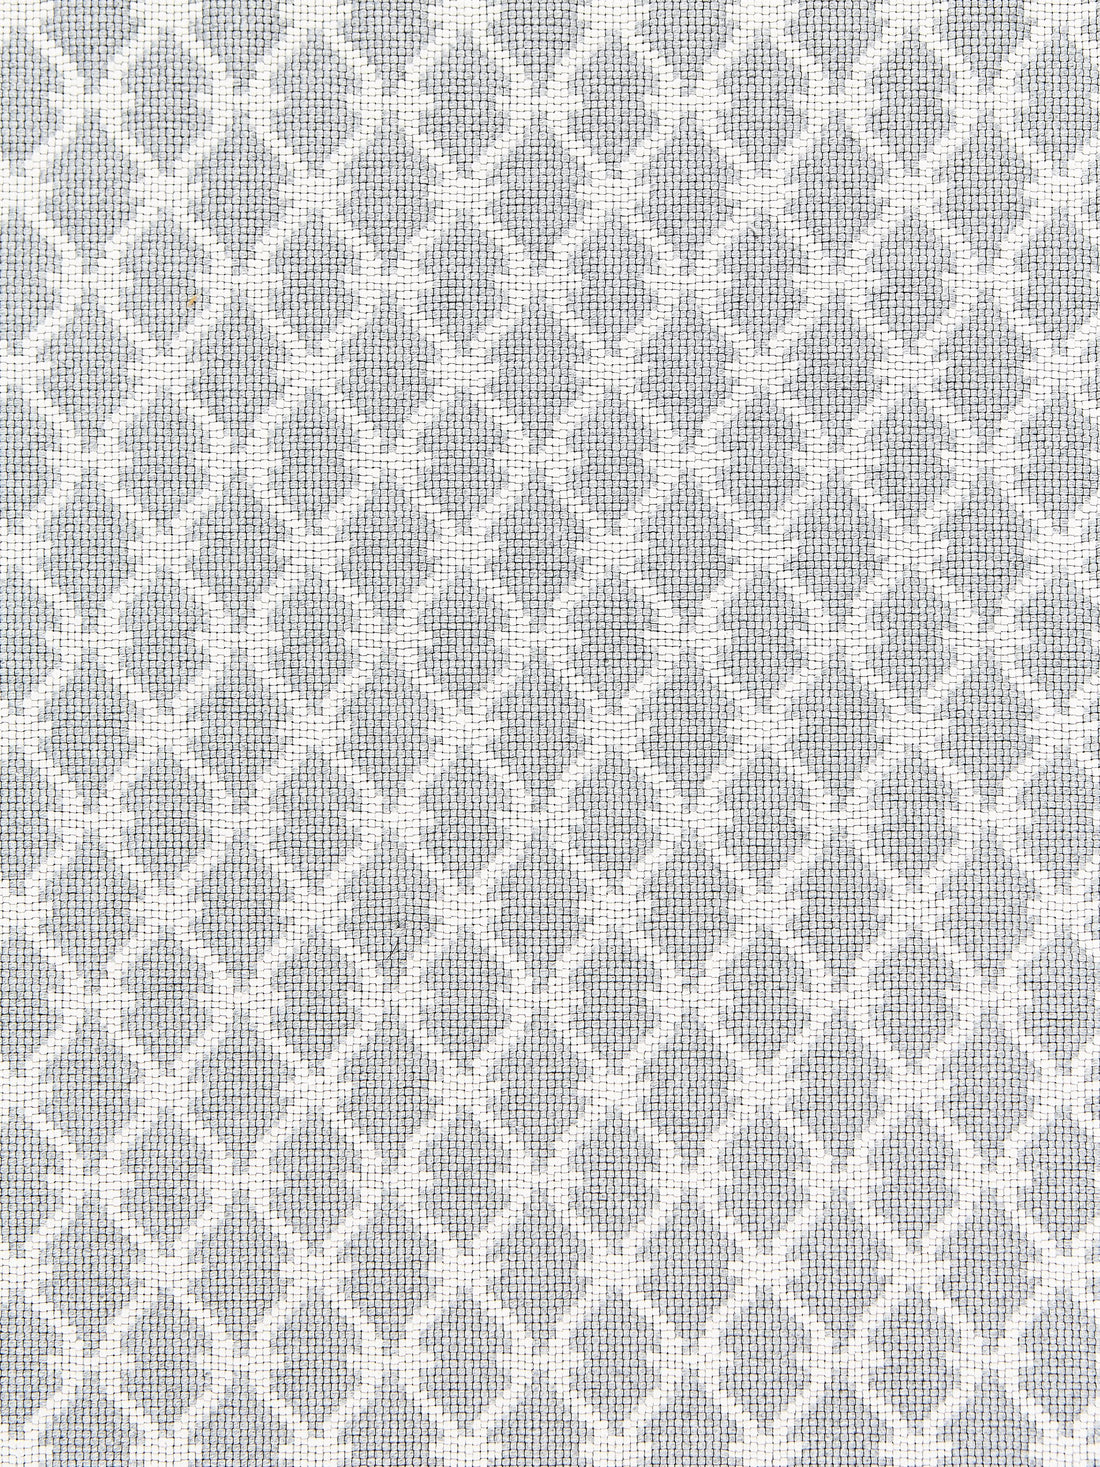 Trellis Weave fabric in pearl grey color - pattern number SC 000227009 - by Scalamandre in the Scalamandre Fabrics Book 1 collection